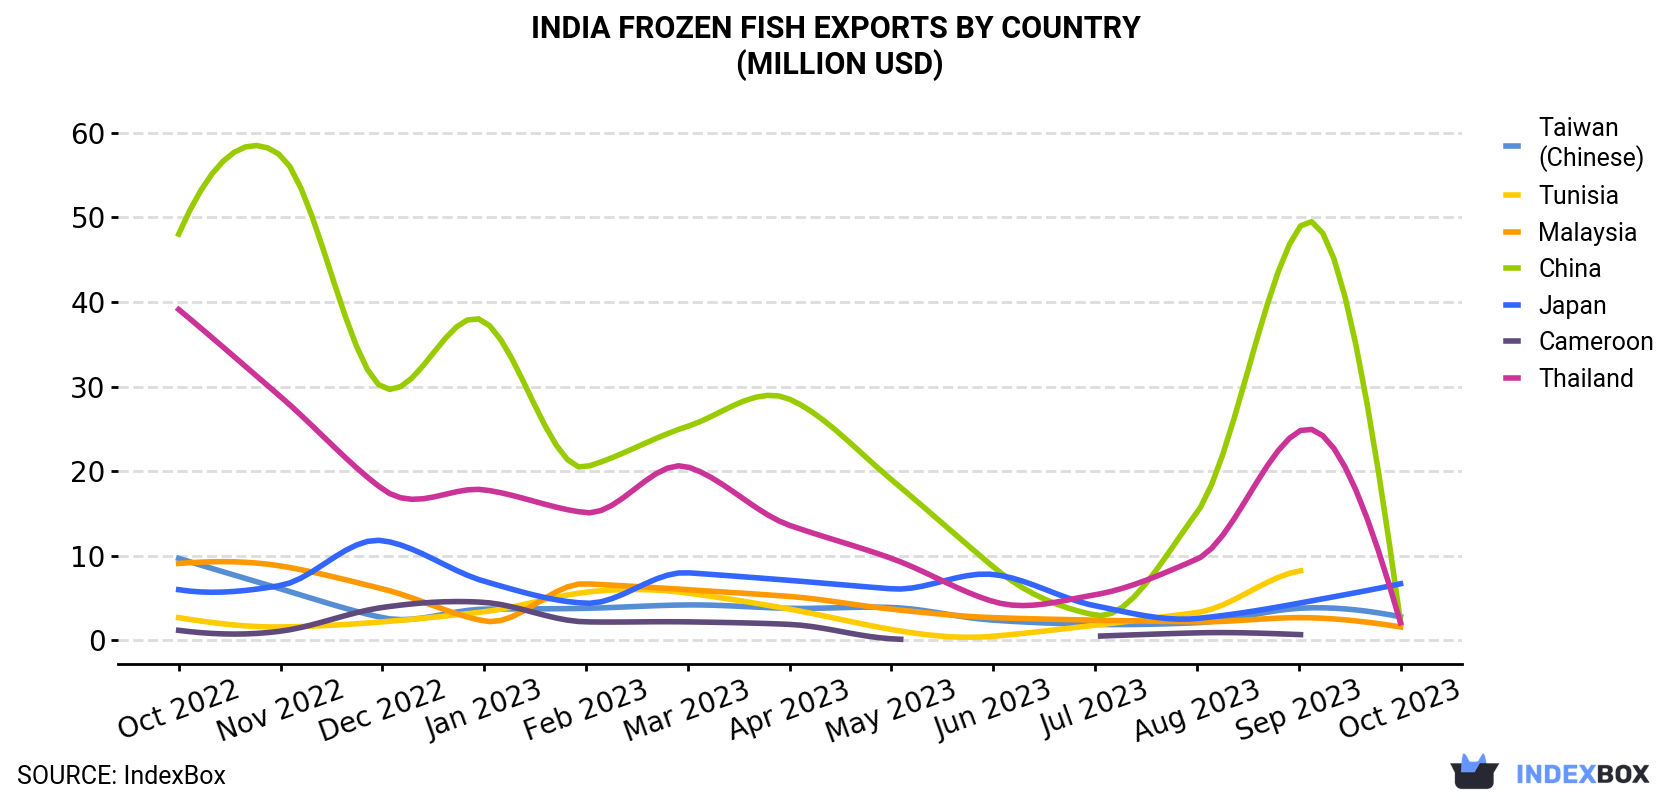 India Frozen Fish Exports By Country (Million USD)